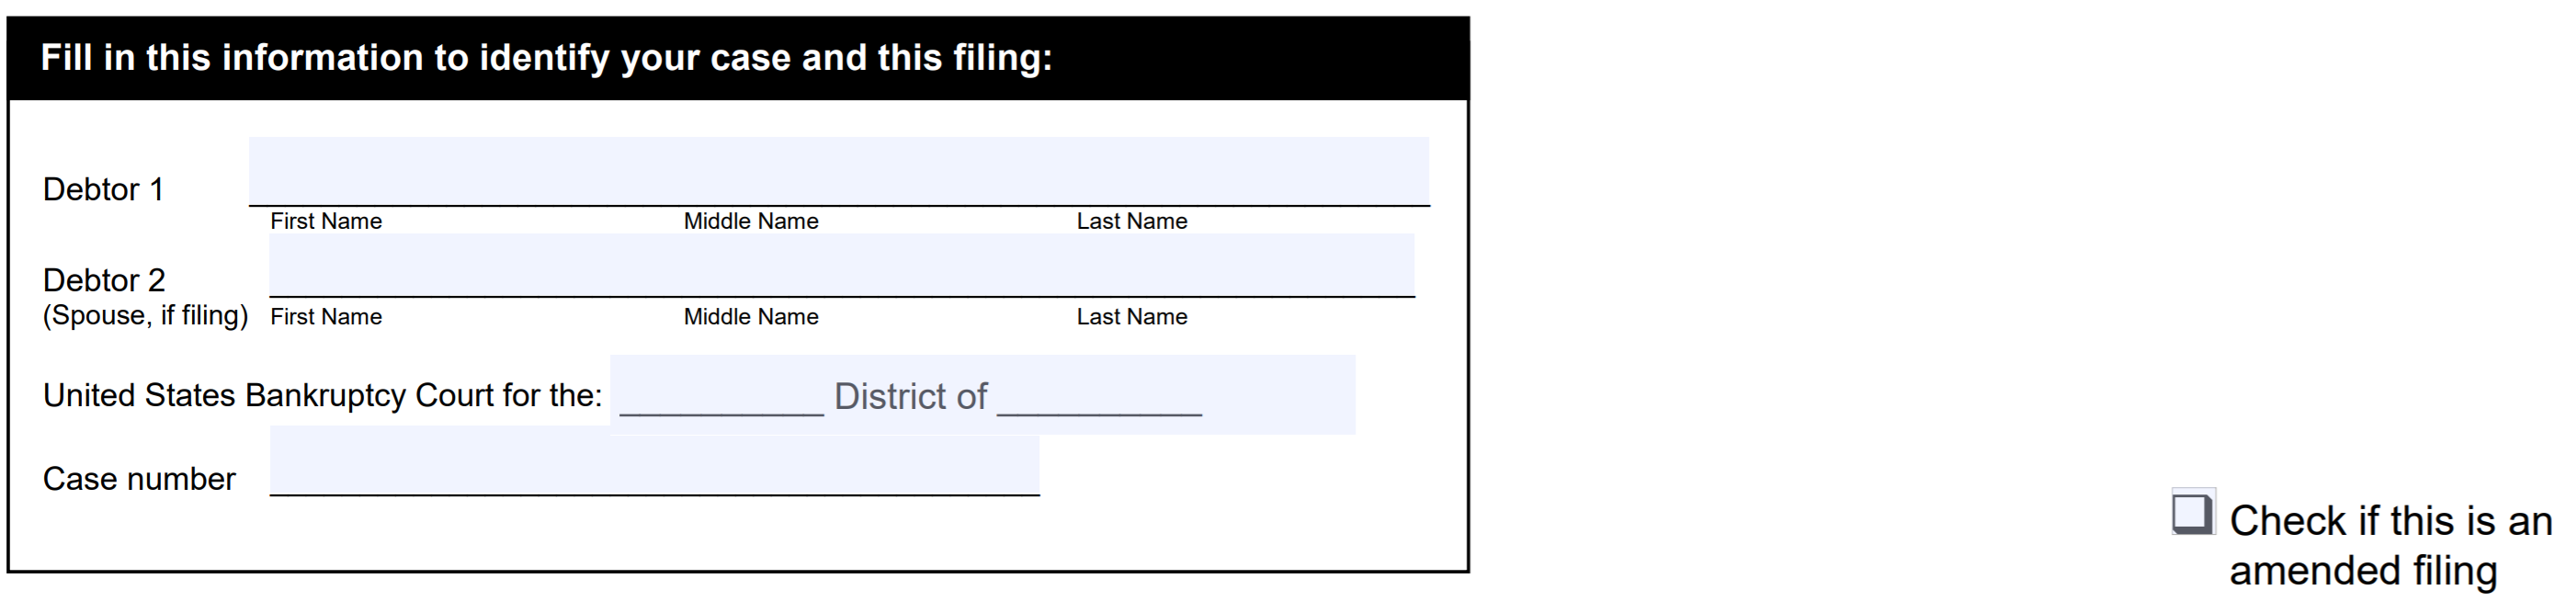 forms-header-long.png